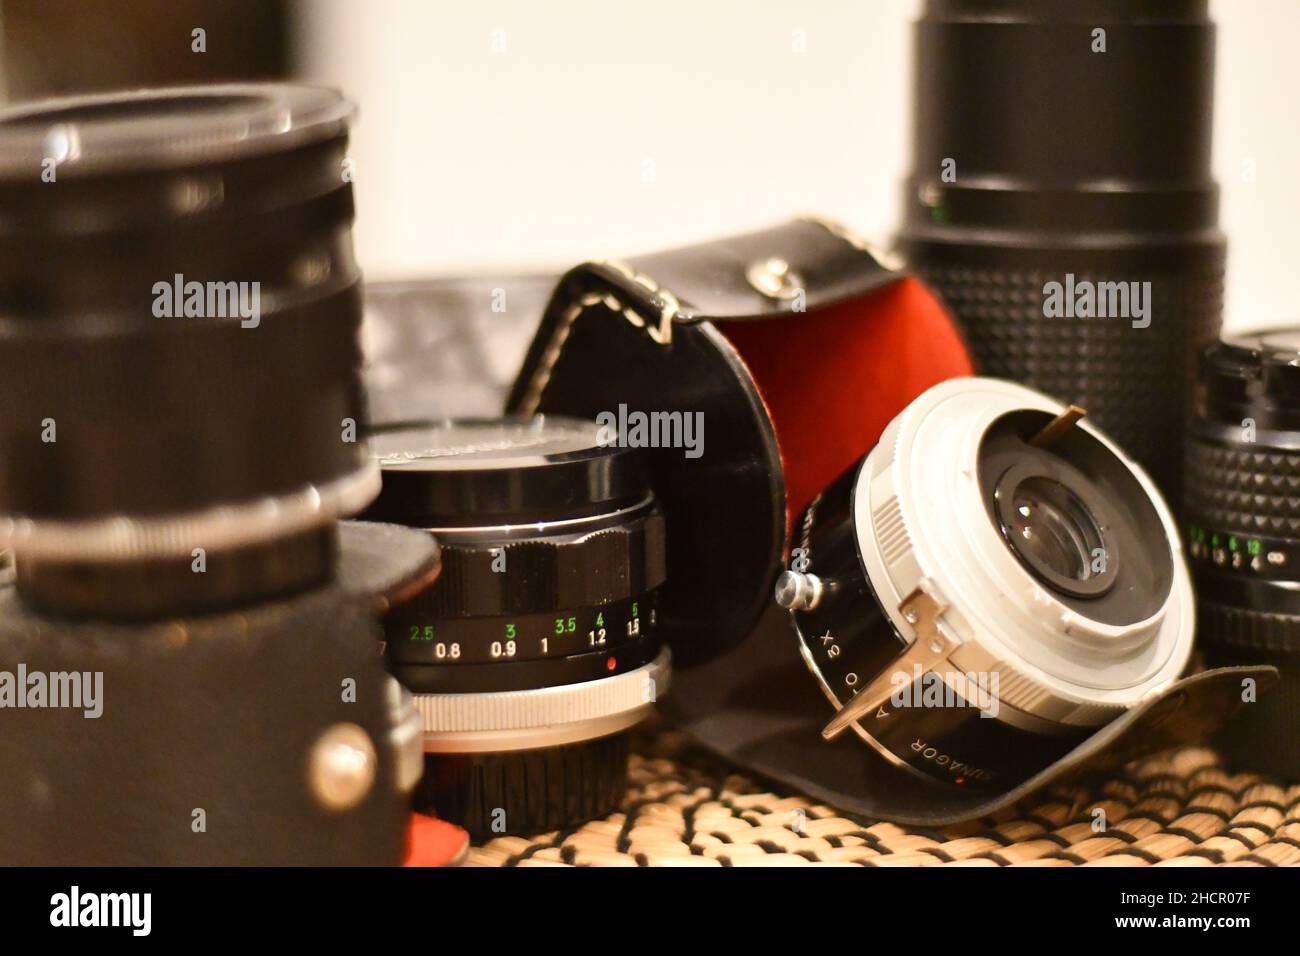 1970s Minolta Camera lenses with their original black leather and red internal cases Stock Photo